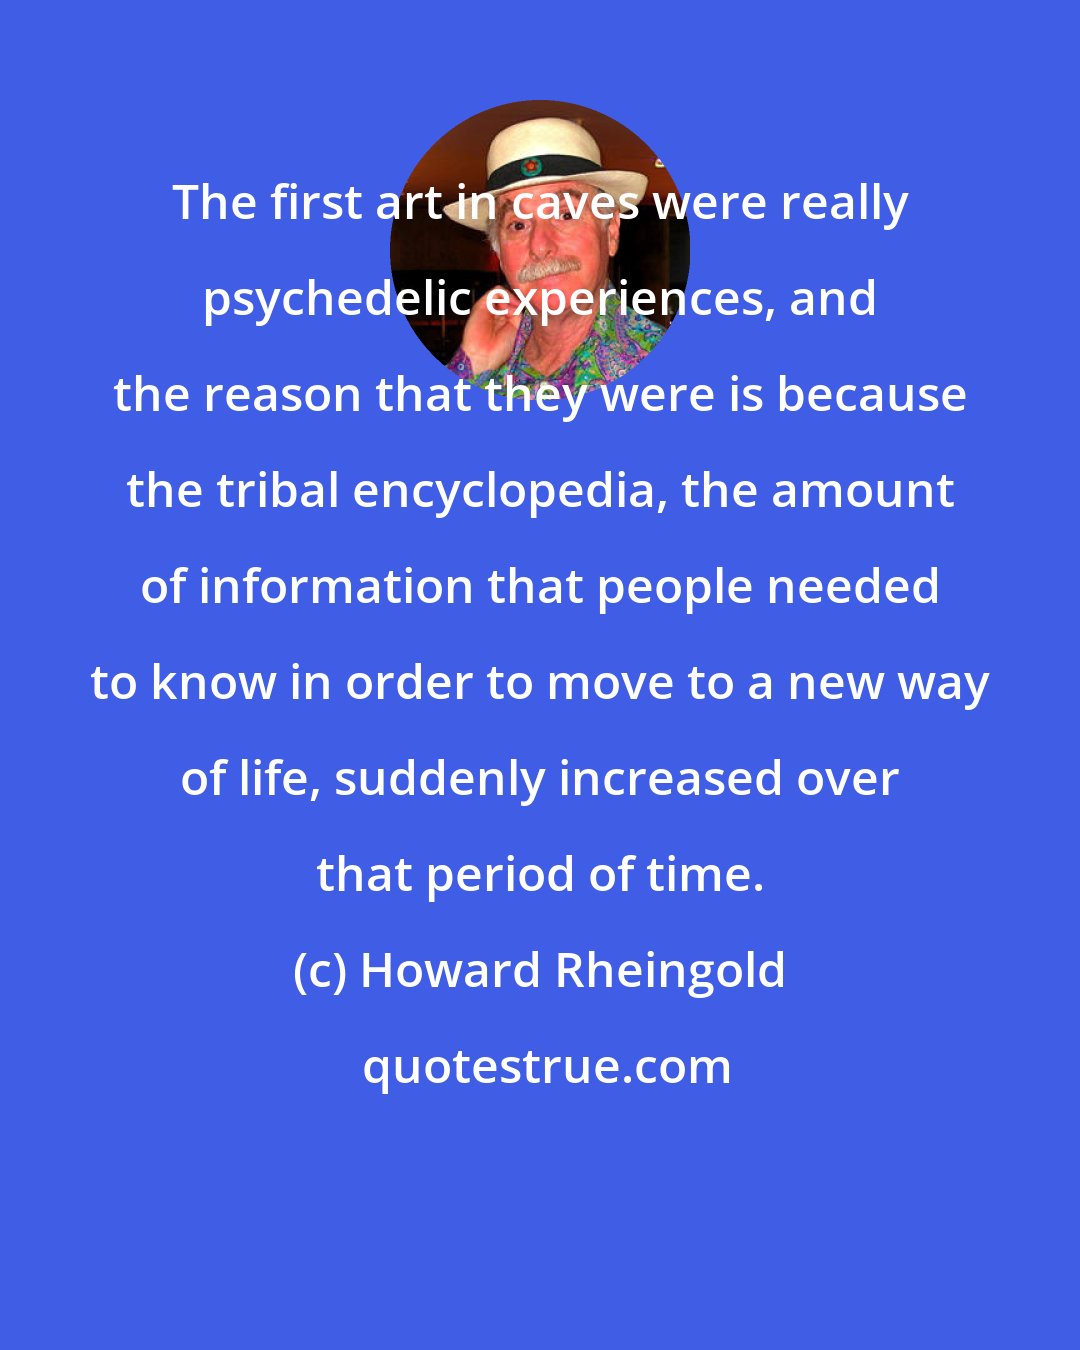 Howard Rheingold: The first art in caves were really psychedelic experiences, and the reason that they were is because the tribal encyclopedia, the amount of information that people needed to know in order to move to a new way of life, suddenly increased over that period of time.